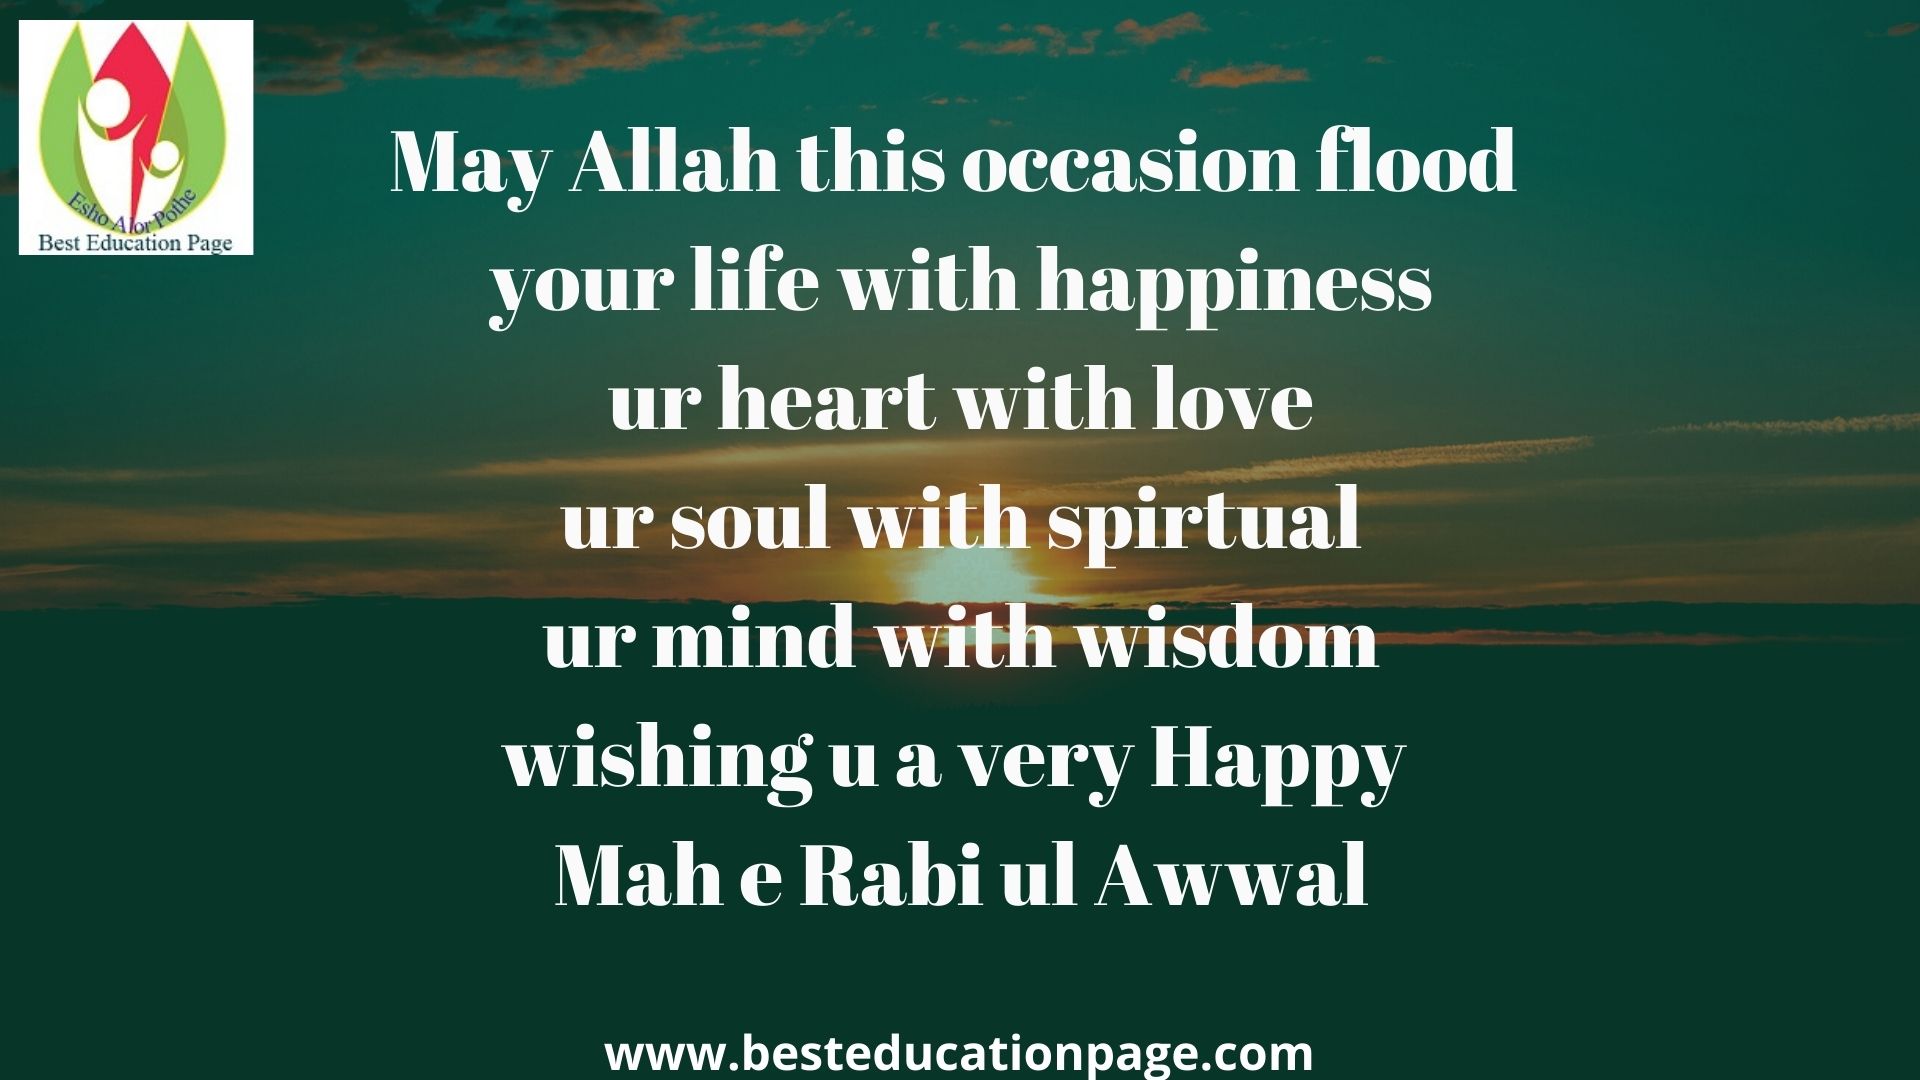 May Allah this occasion flood your life with happiness ur heart with love ur soul with spirtual ur mind with wisdom wishing u a very Happy Mah e Rabi ul Awwal